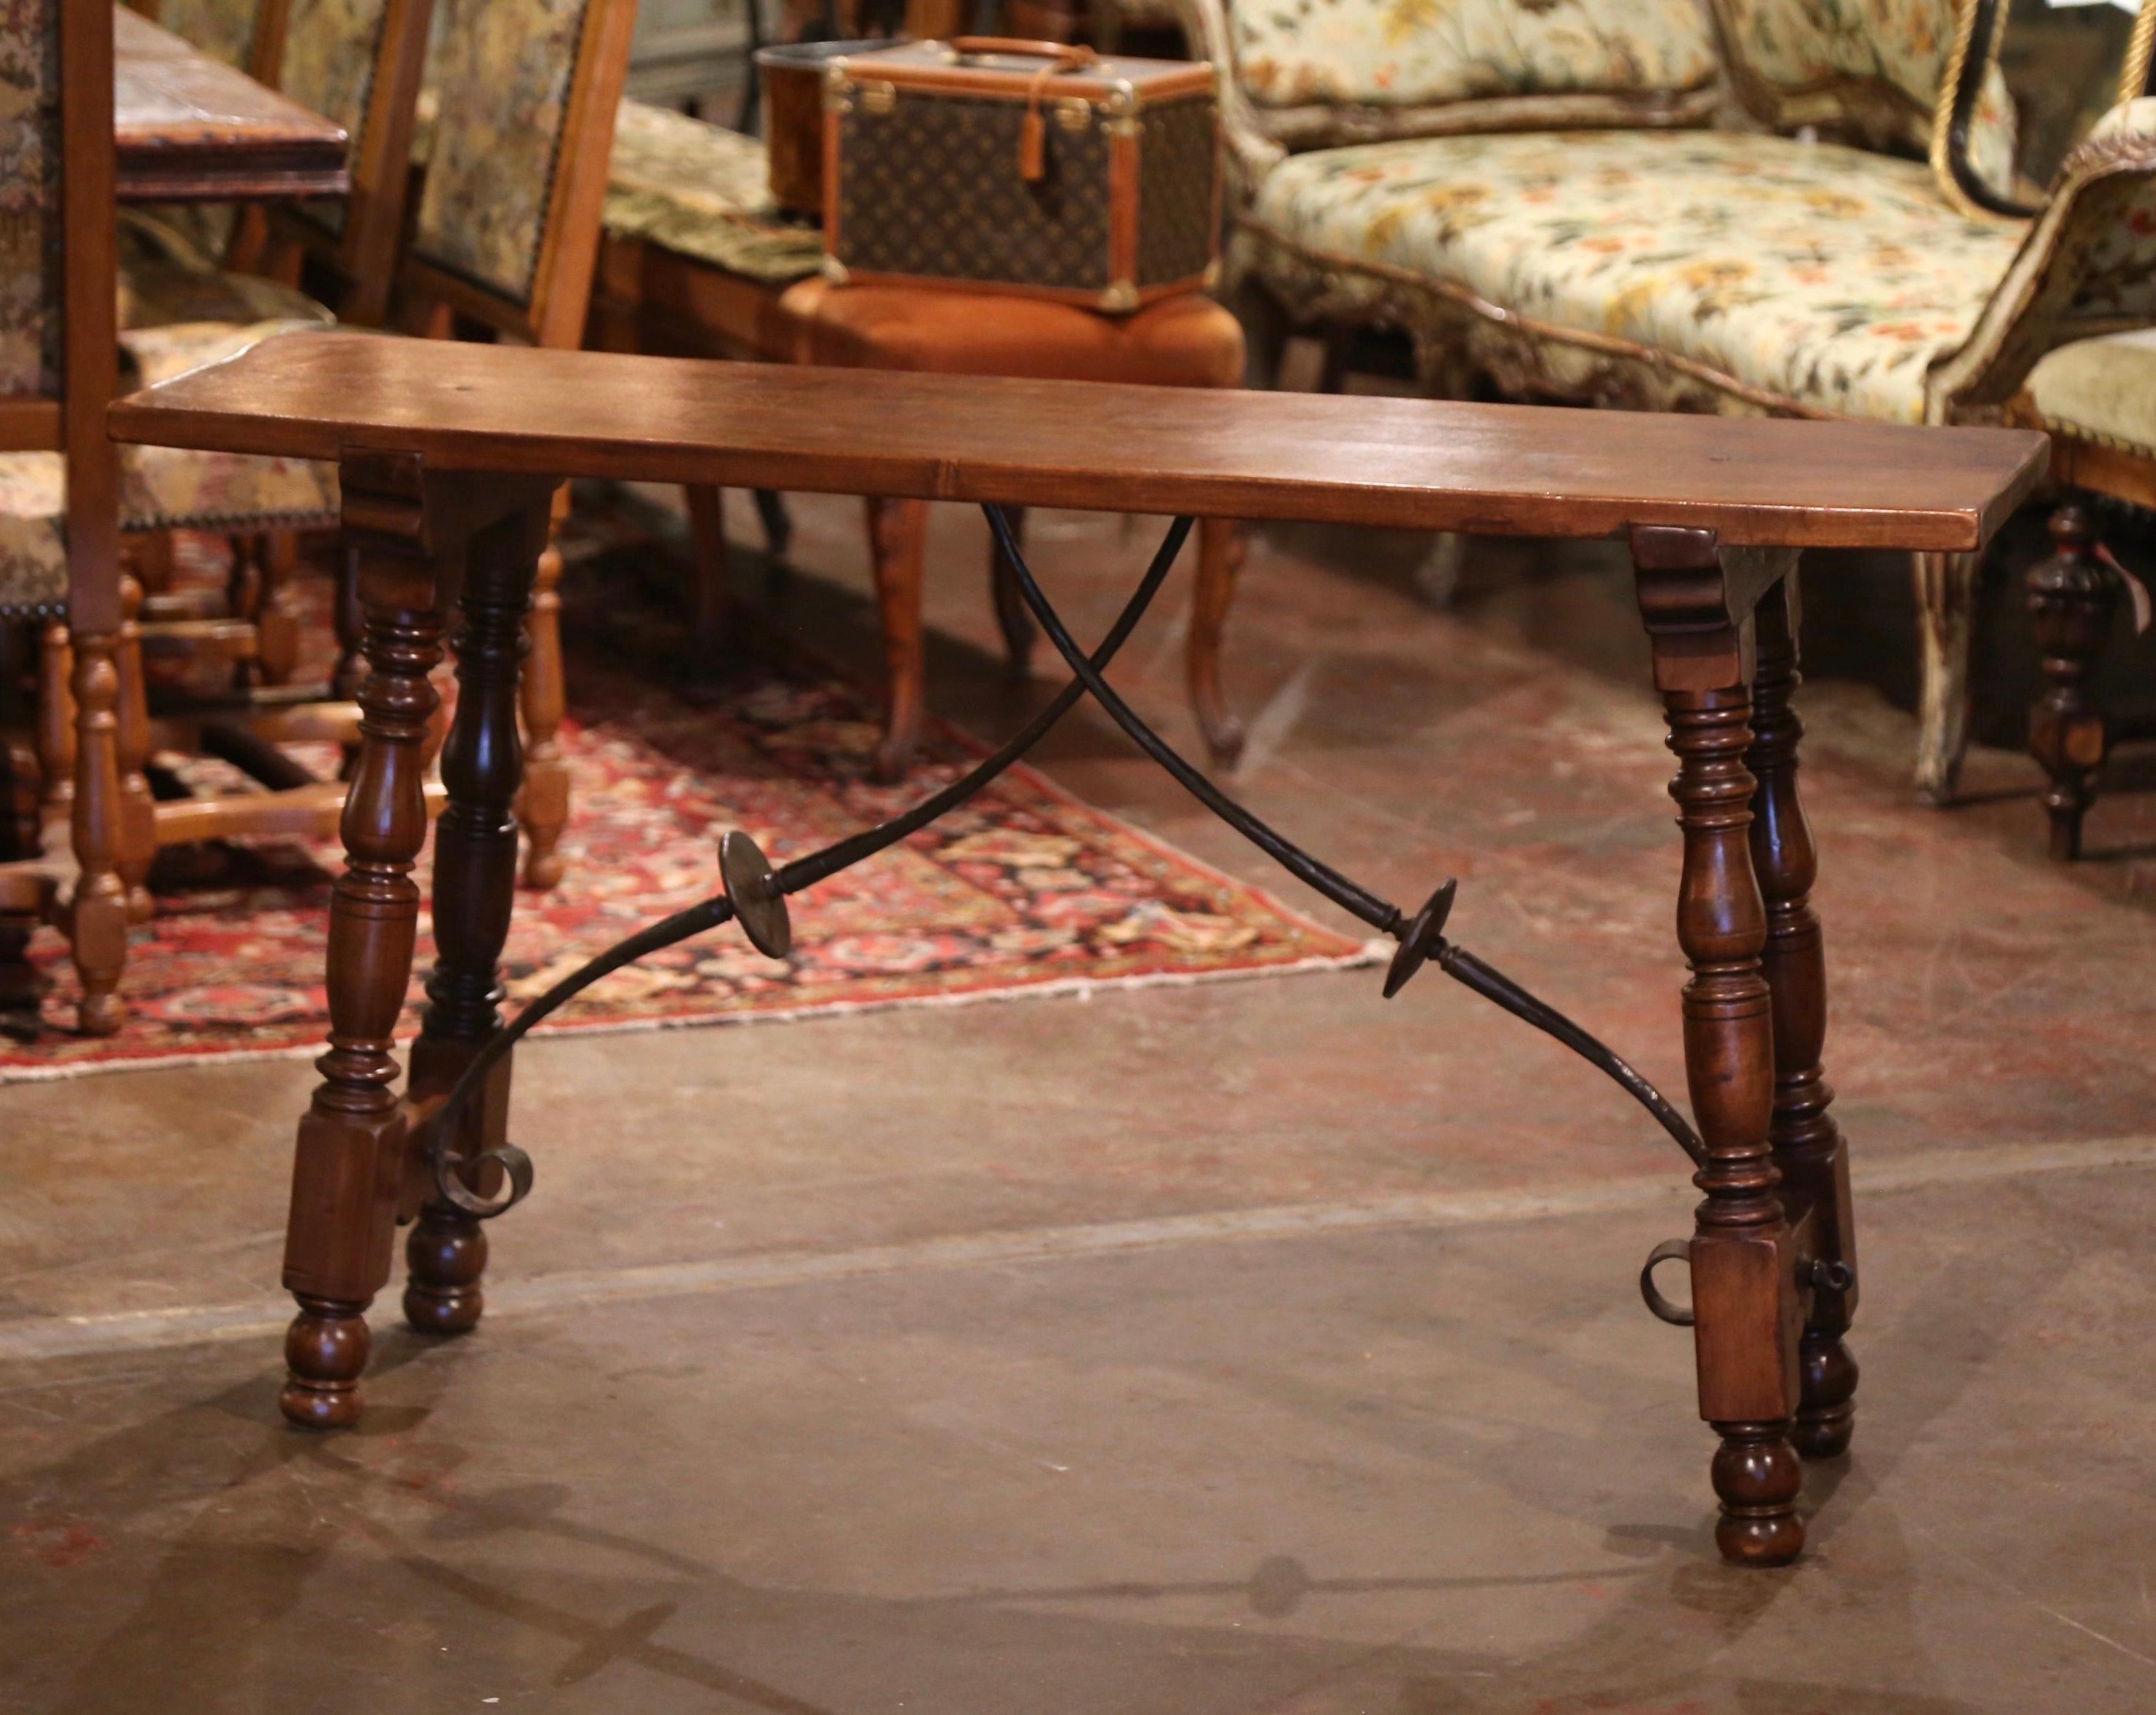 Place this elegant antique console table behind a sofa. Carved in Spain circa 1920, the narrow trestle table stands on two intricate carved turned legs, connected with a thick scrolled forged foliate iron stretcher. The table is in excellent